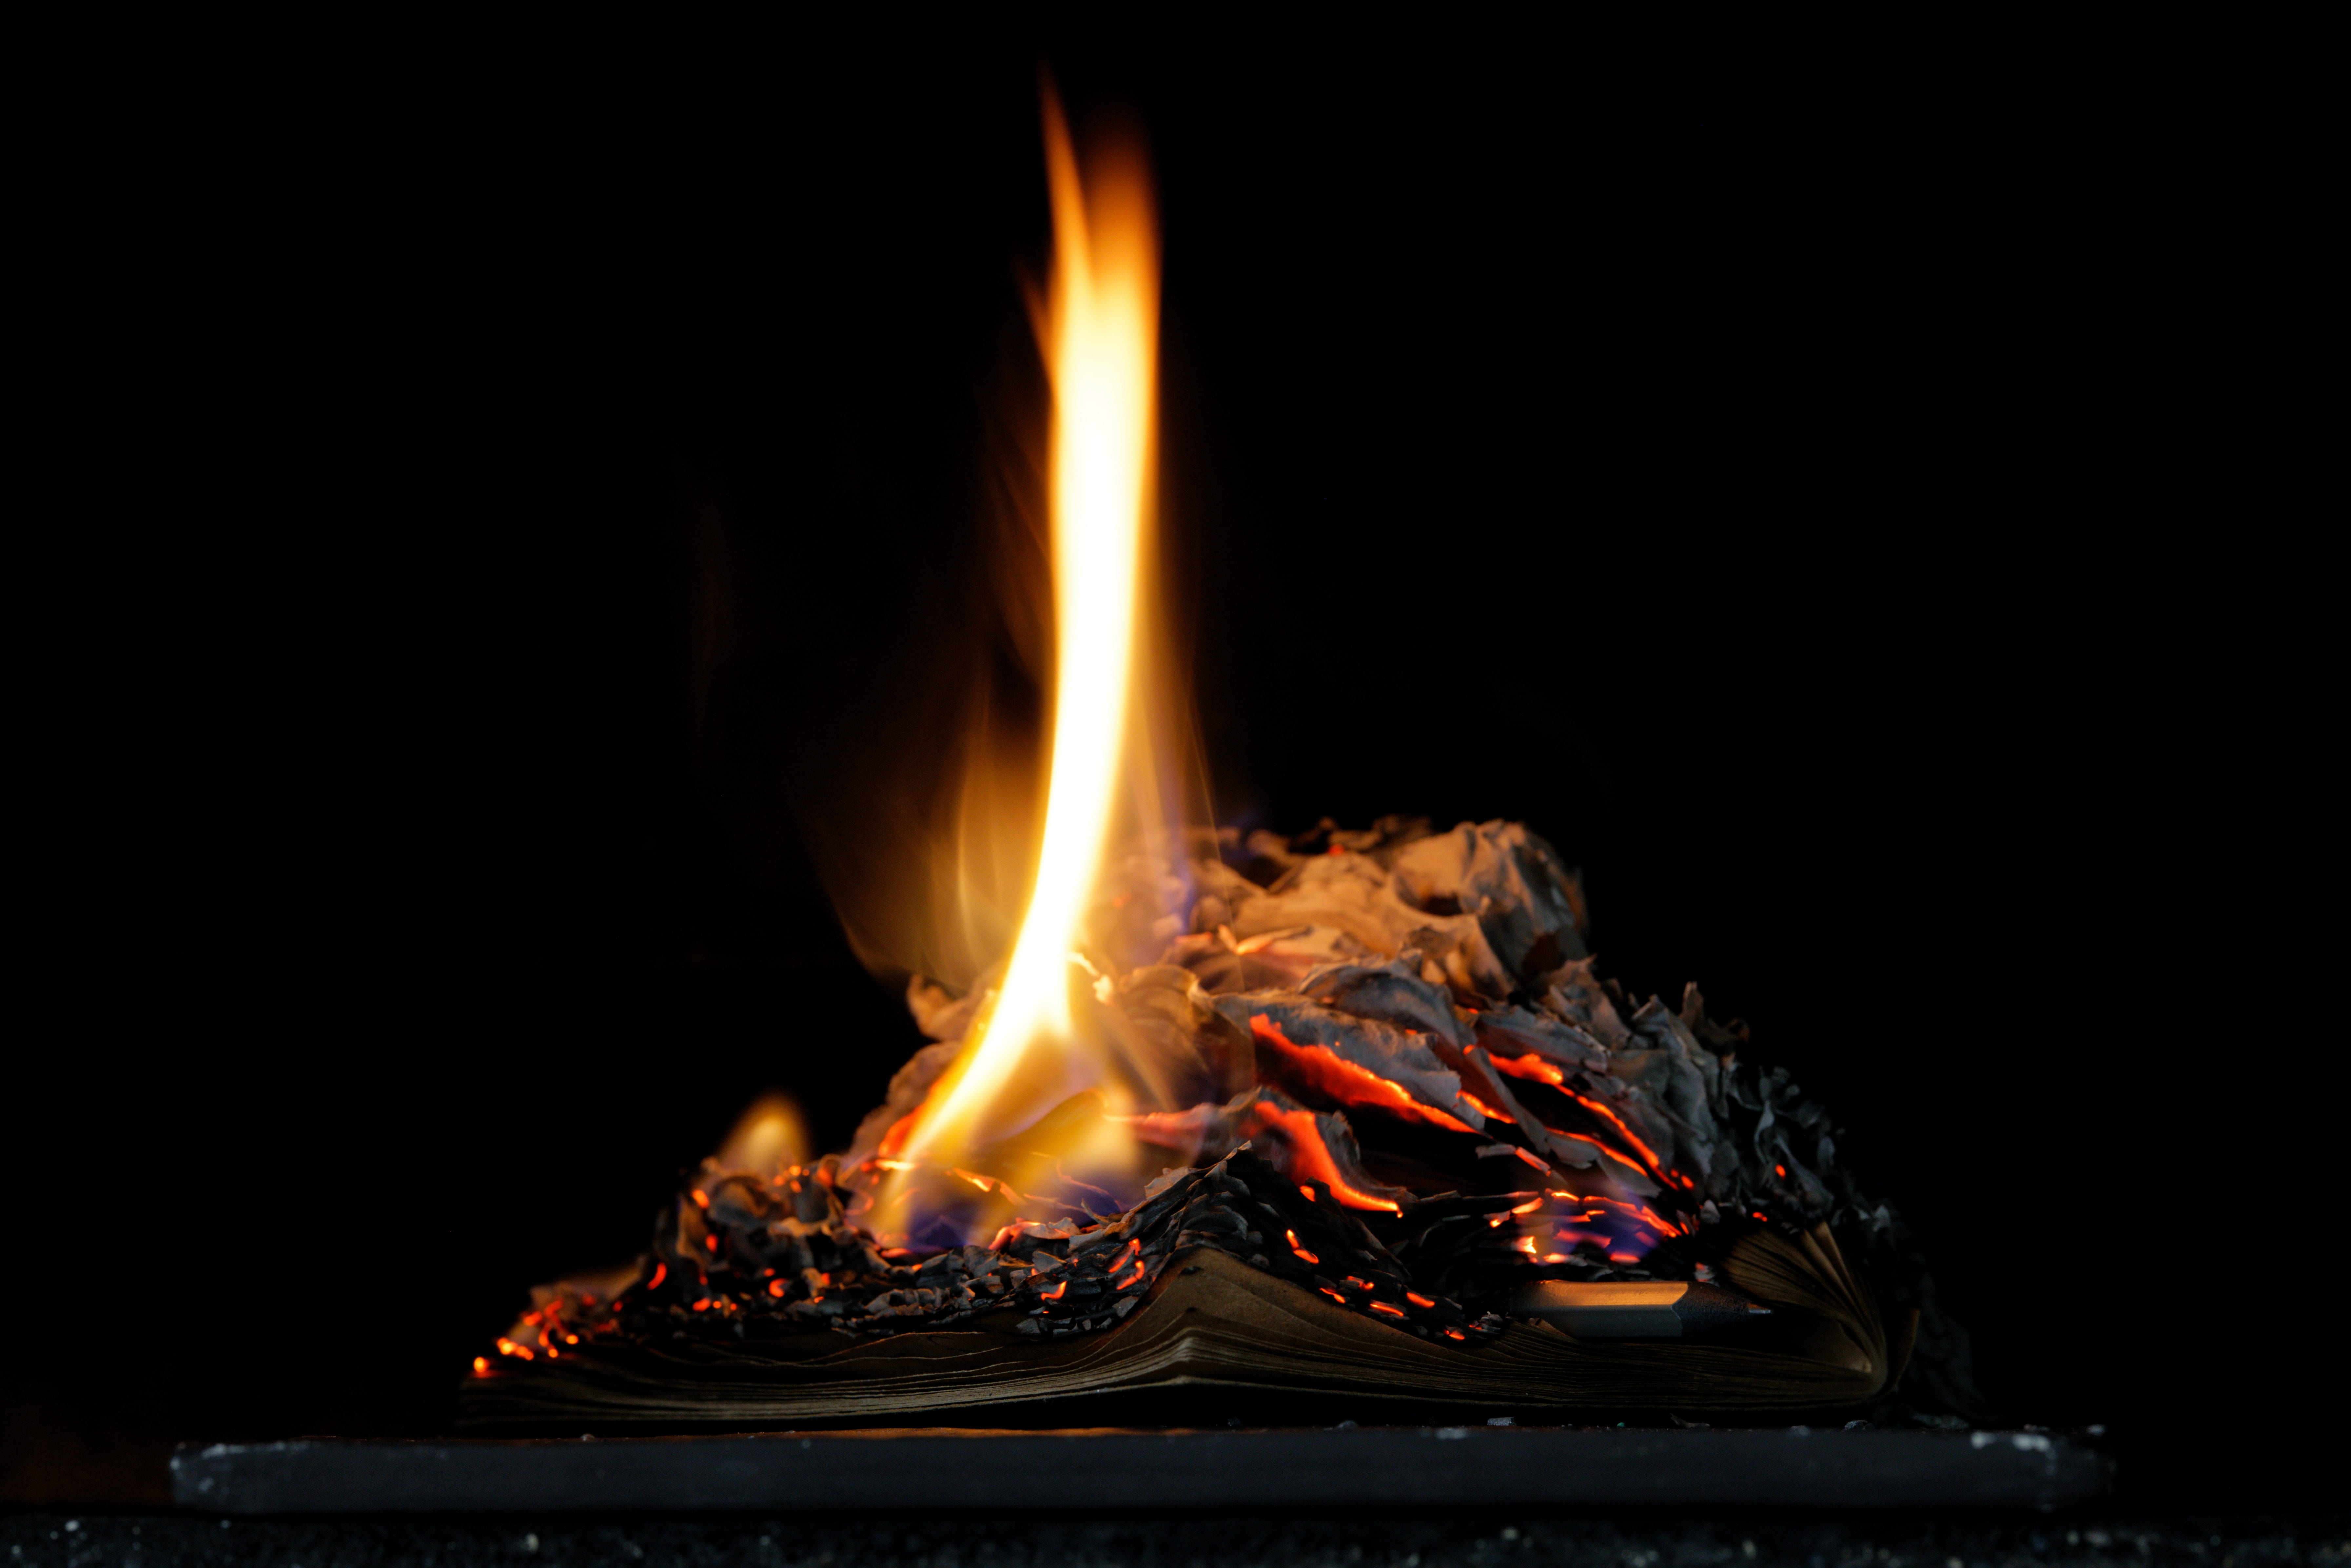 A small stack of paper on fire against a black background.